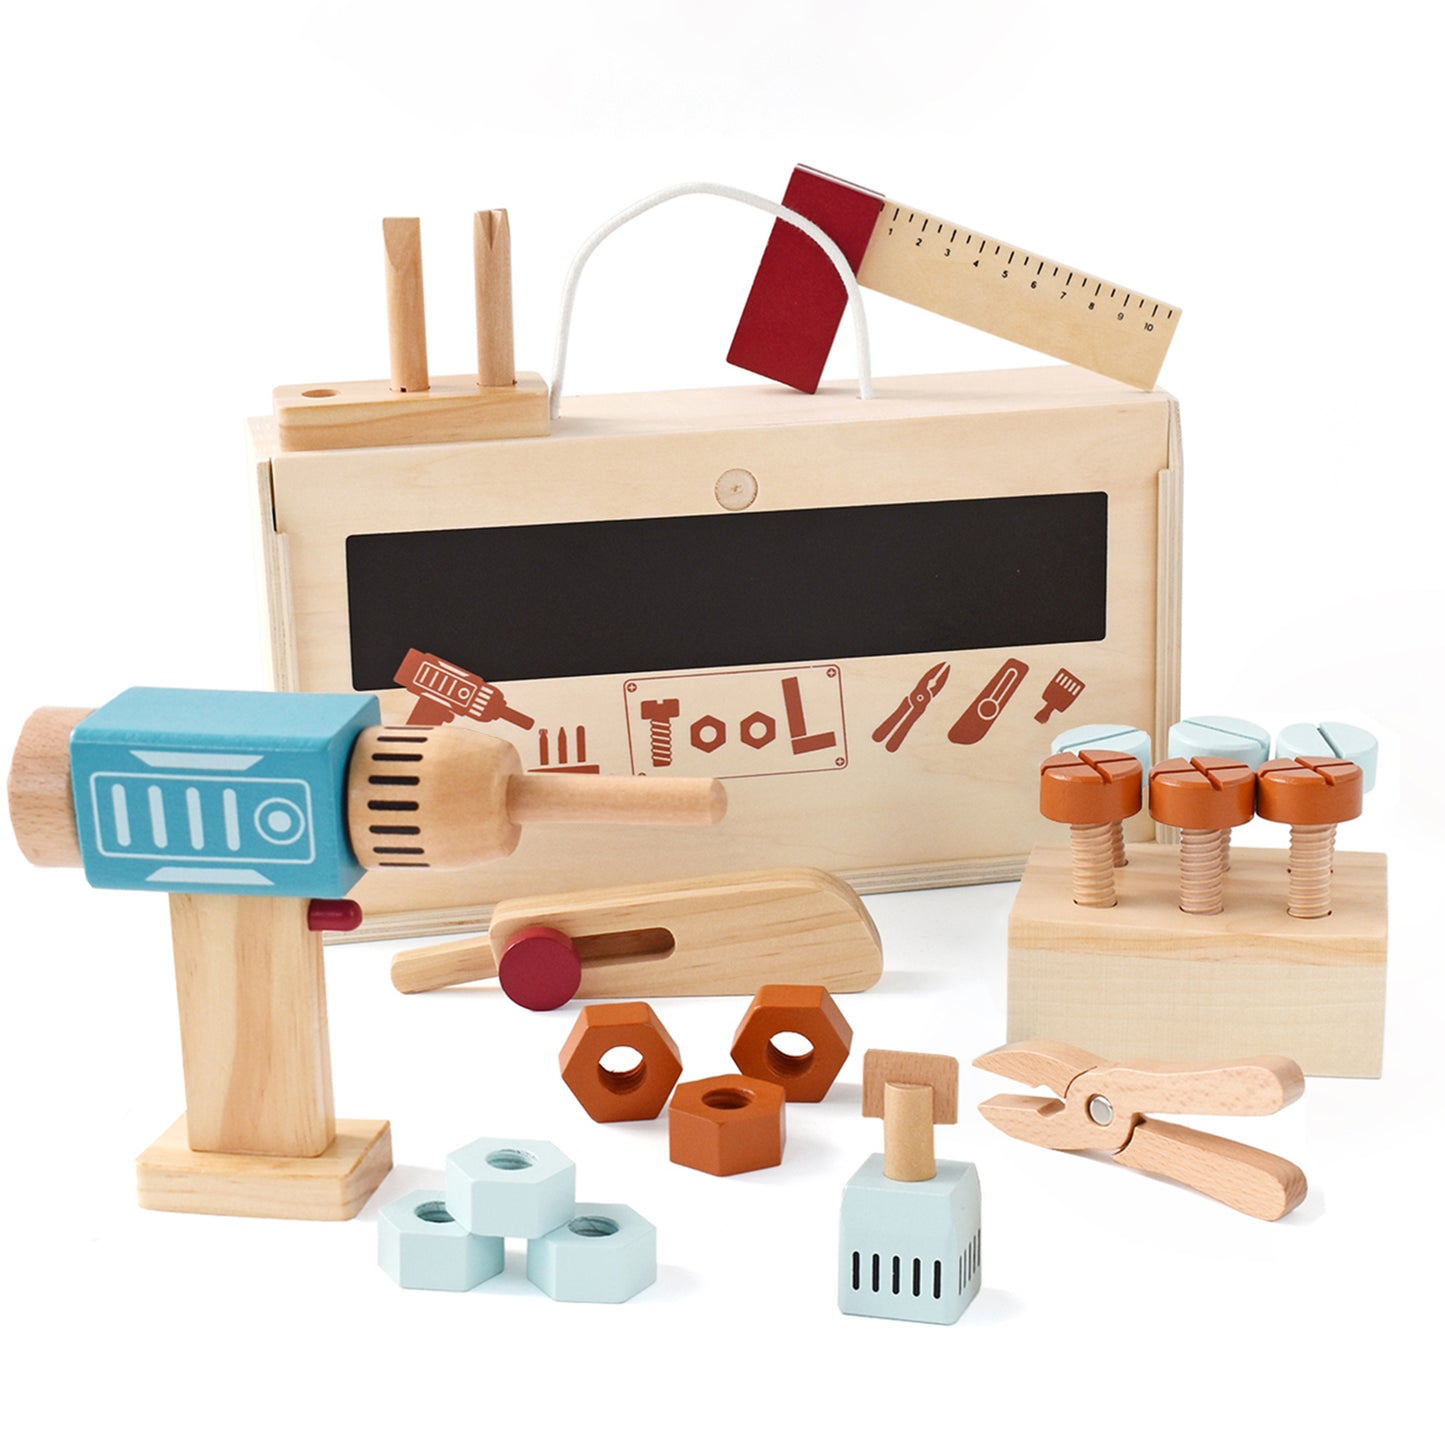 Wooden Toy Tool Box with Dril